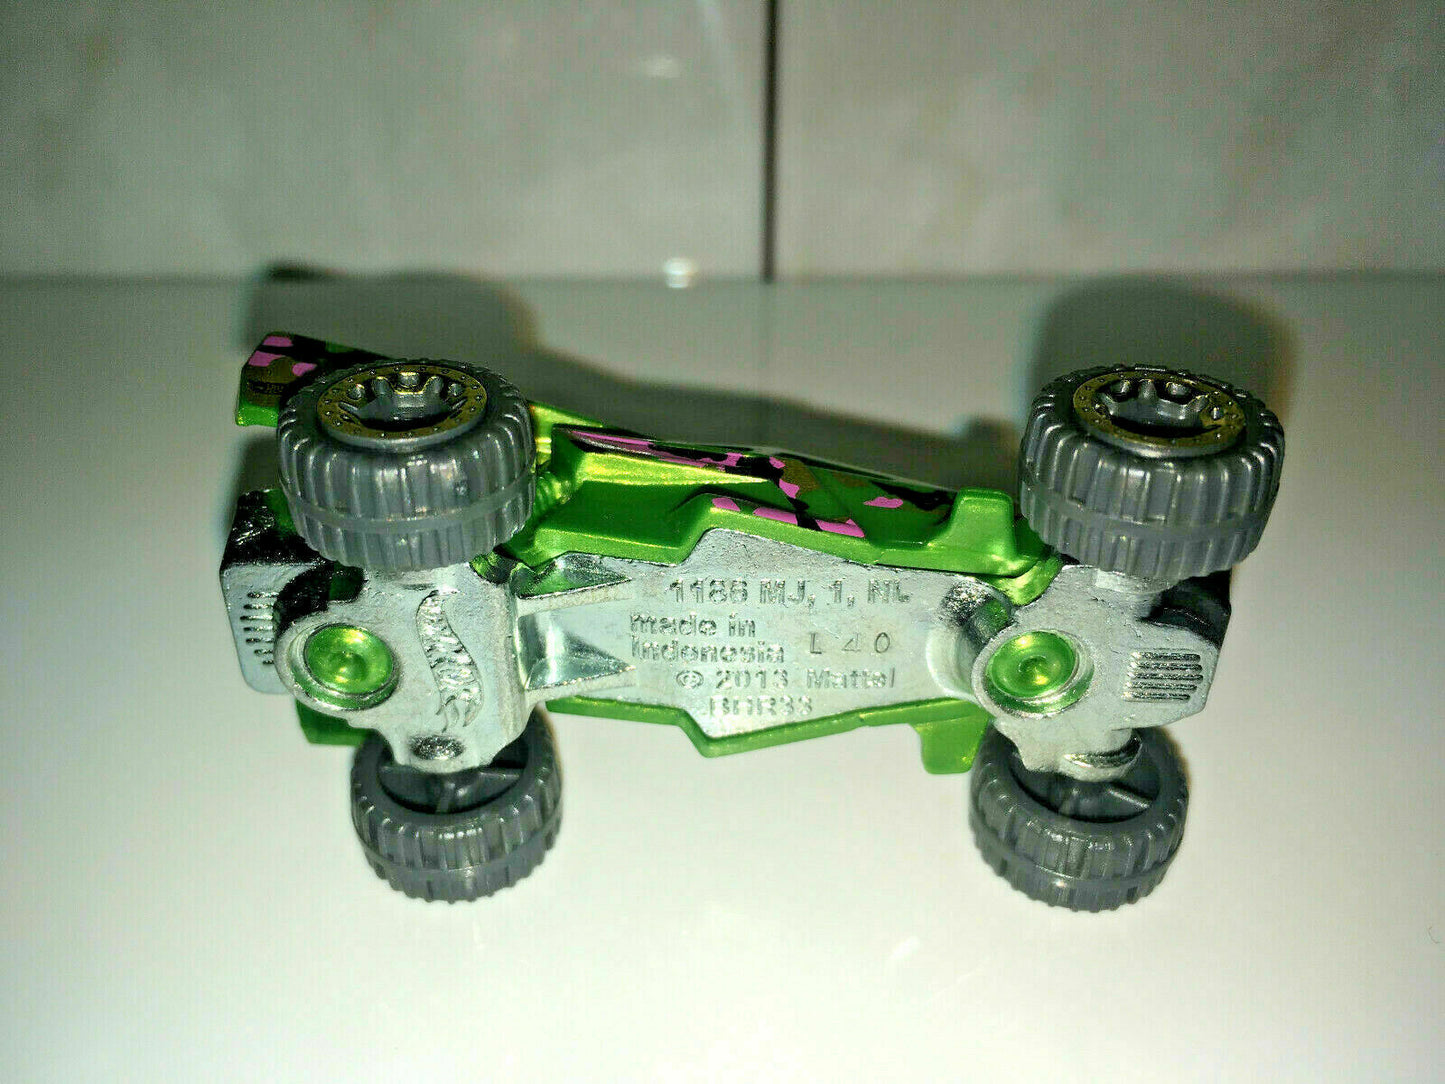 2018 Hot Wheels Loose 2 Pack Exclusive Green Buggy